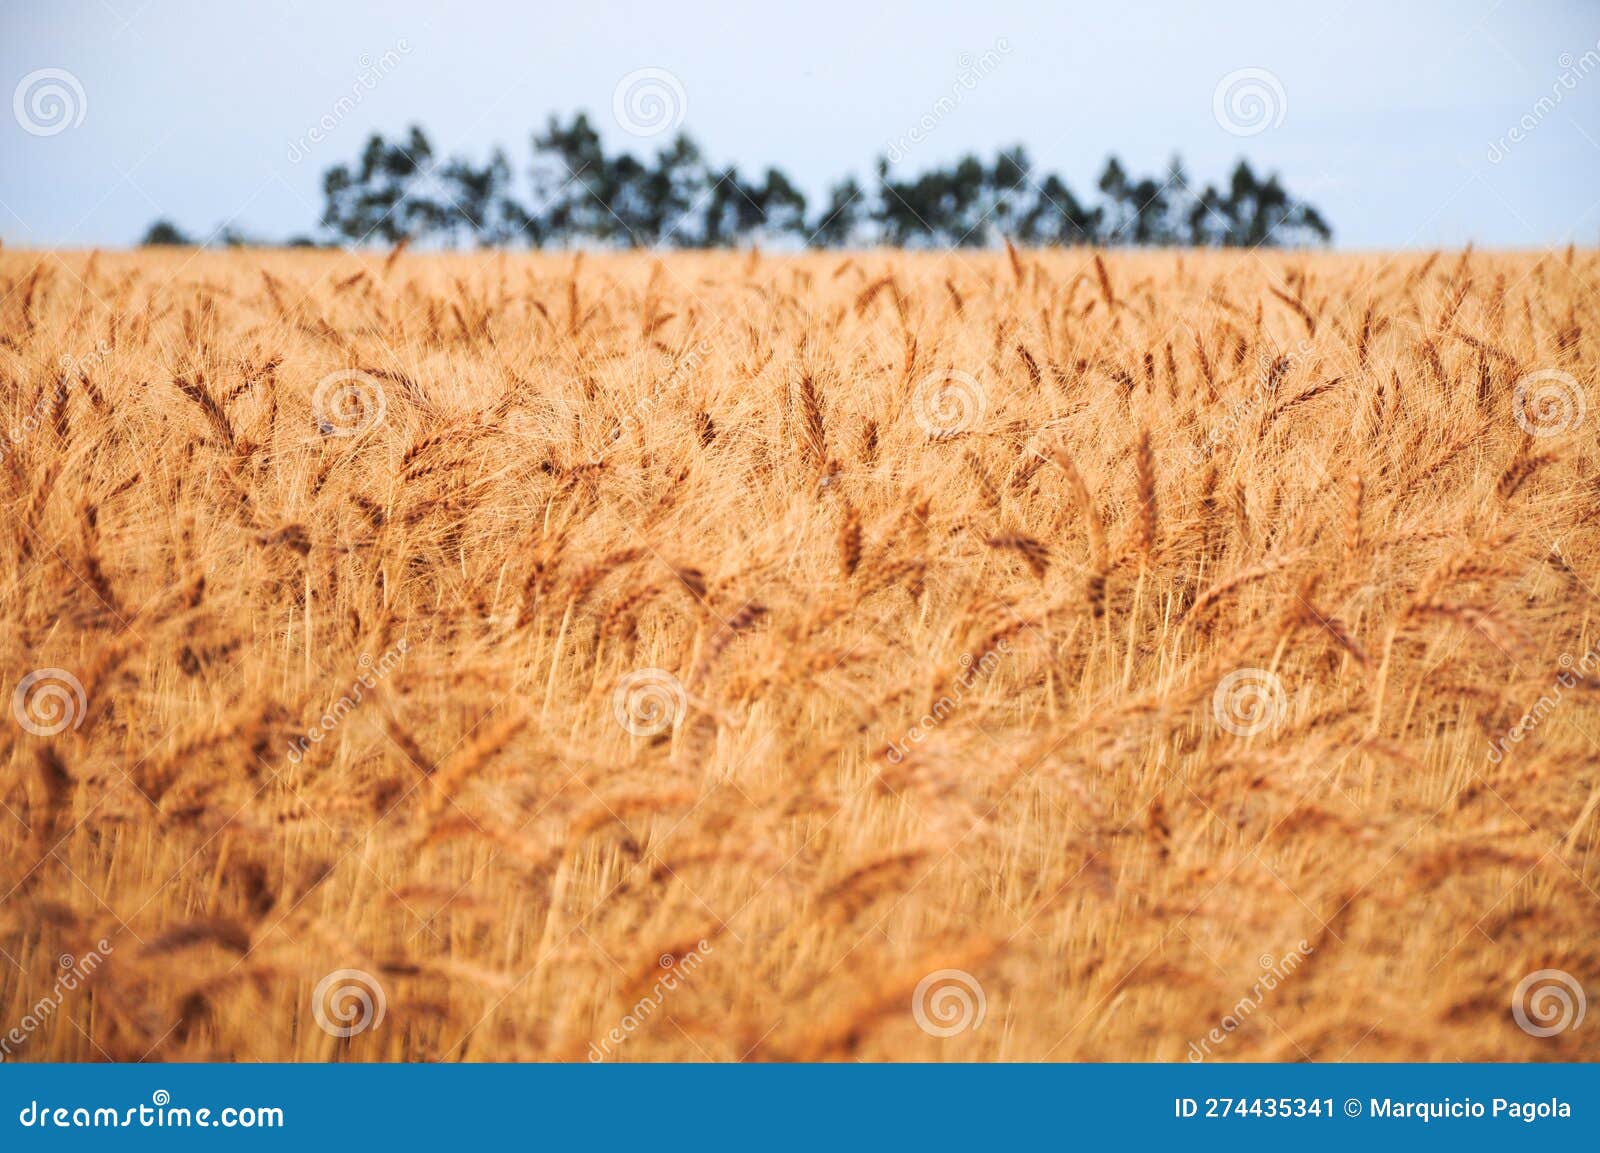 fields of golden crops and scattered trees adorn the landscape in juan lacaze, uruguay.